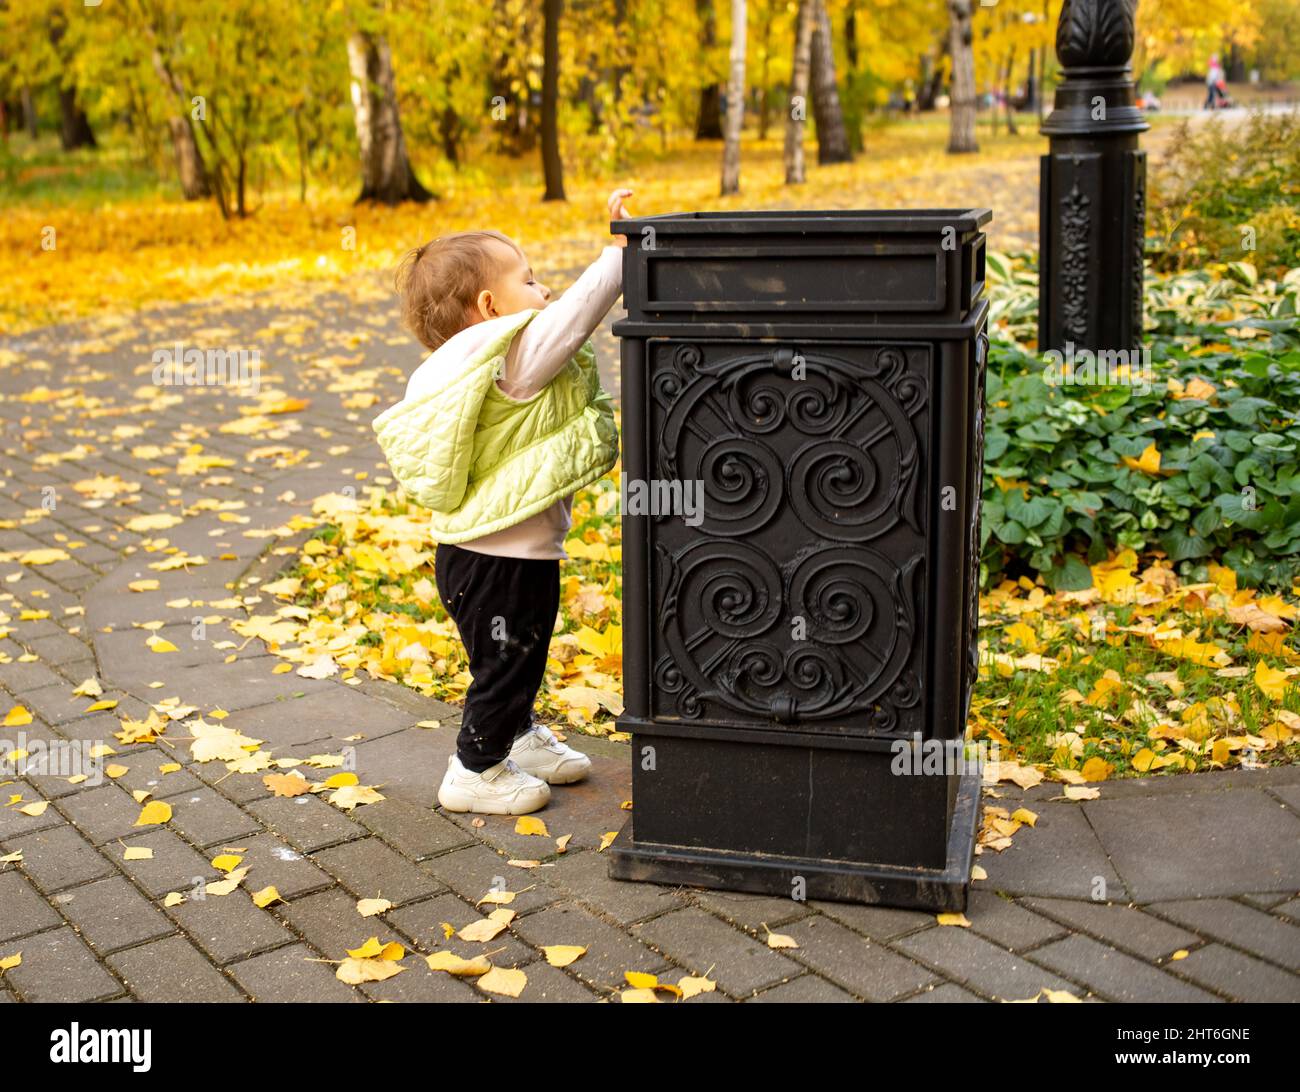 cute little baby throws trash into trash can in autumn park. instilling cultural norms from birth Stock Photo